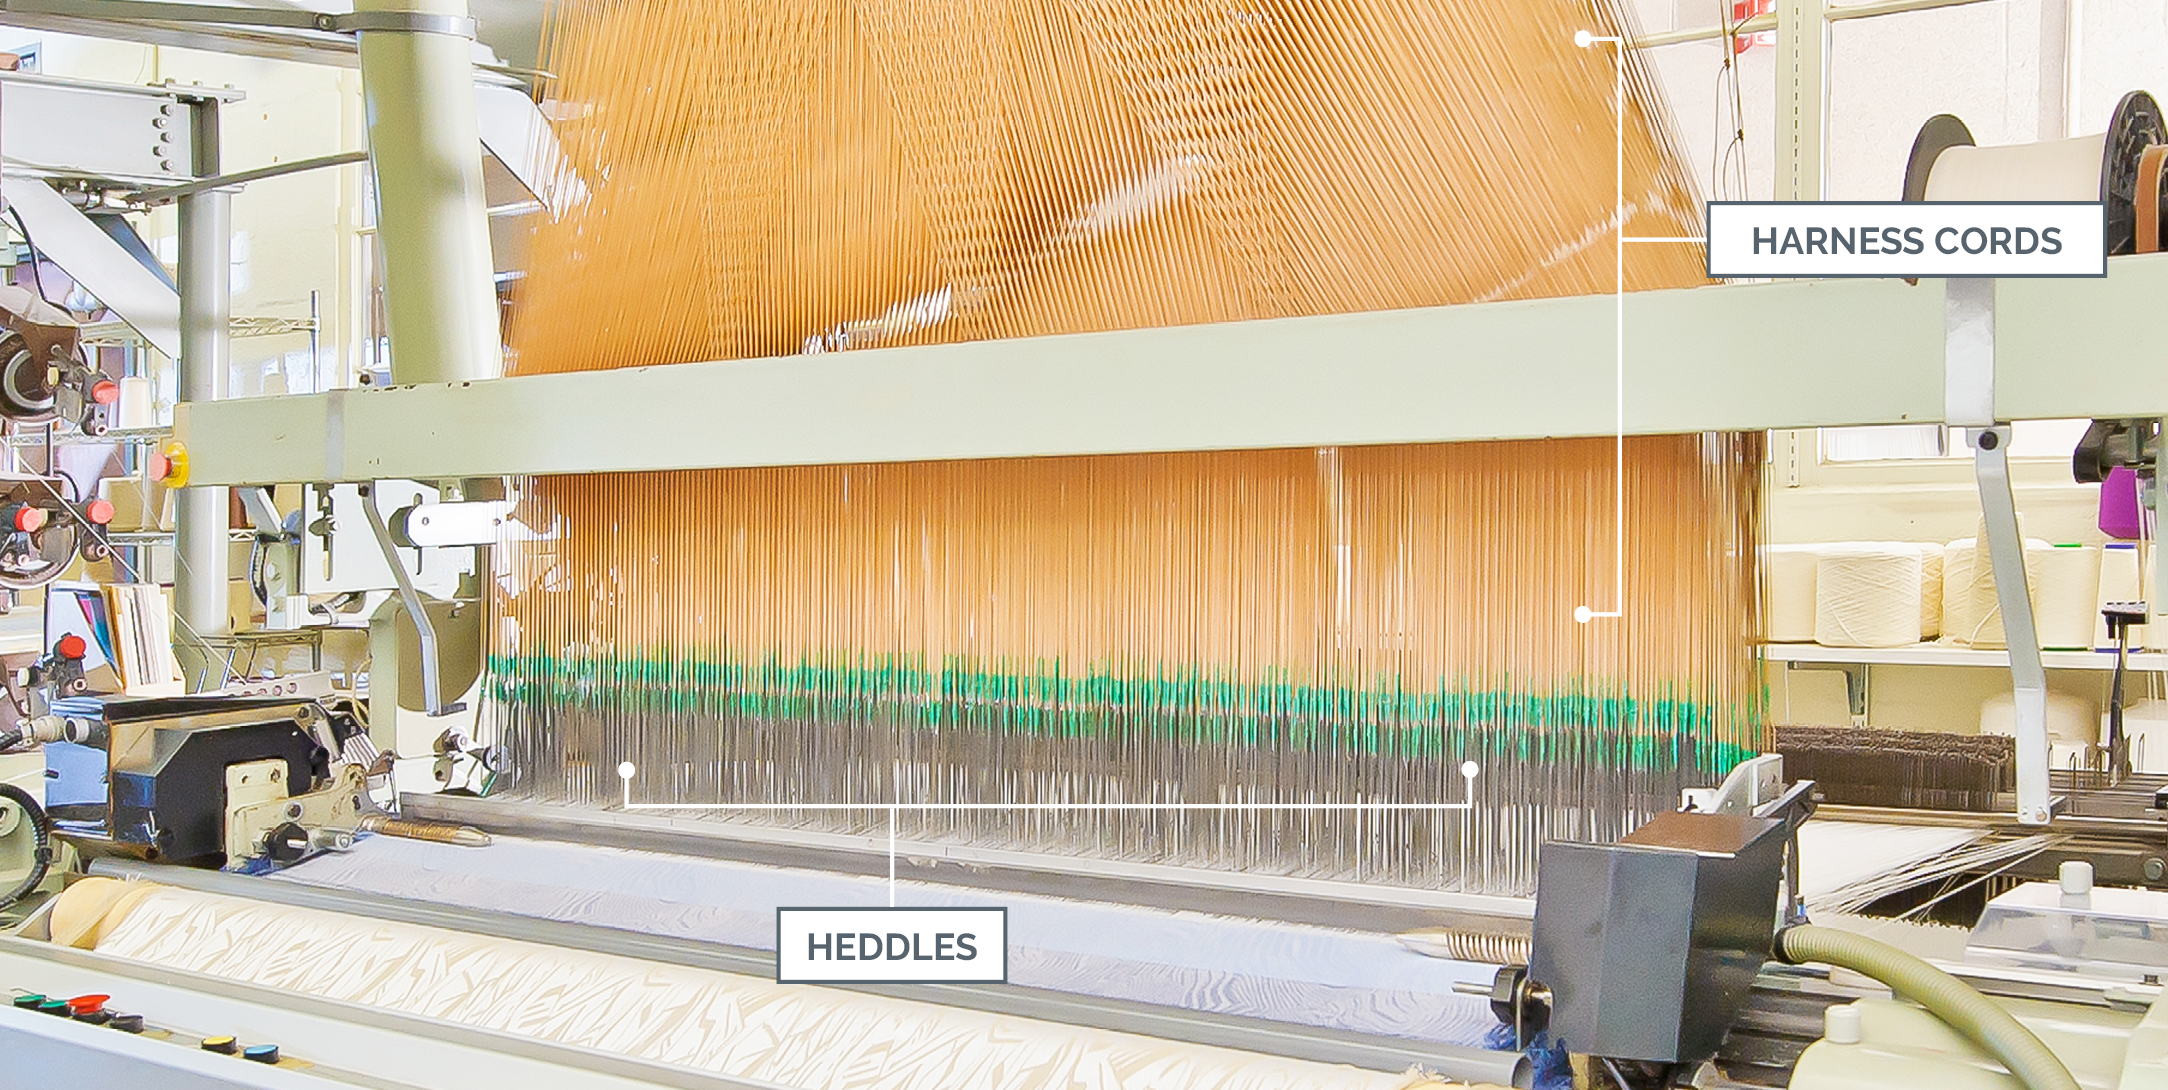 Motions of the Weaving Loom